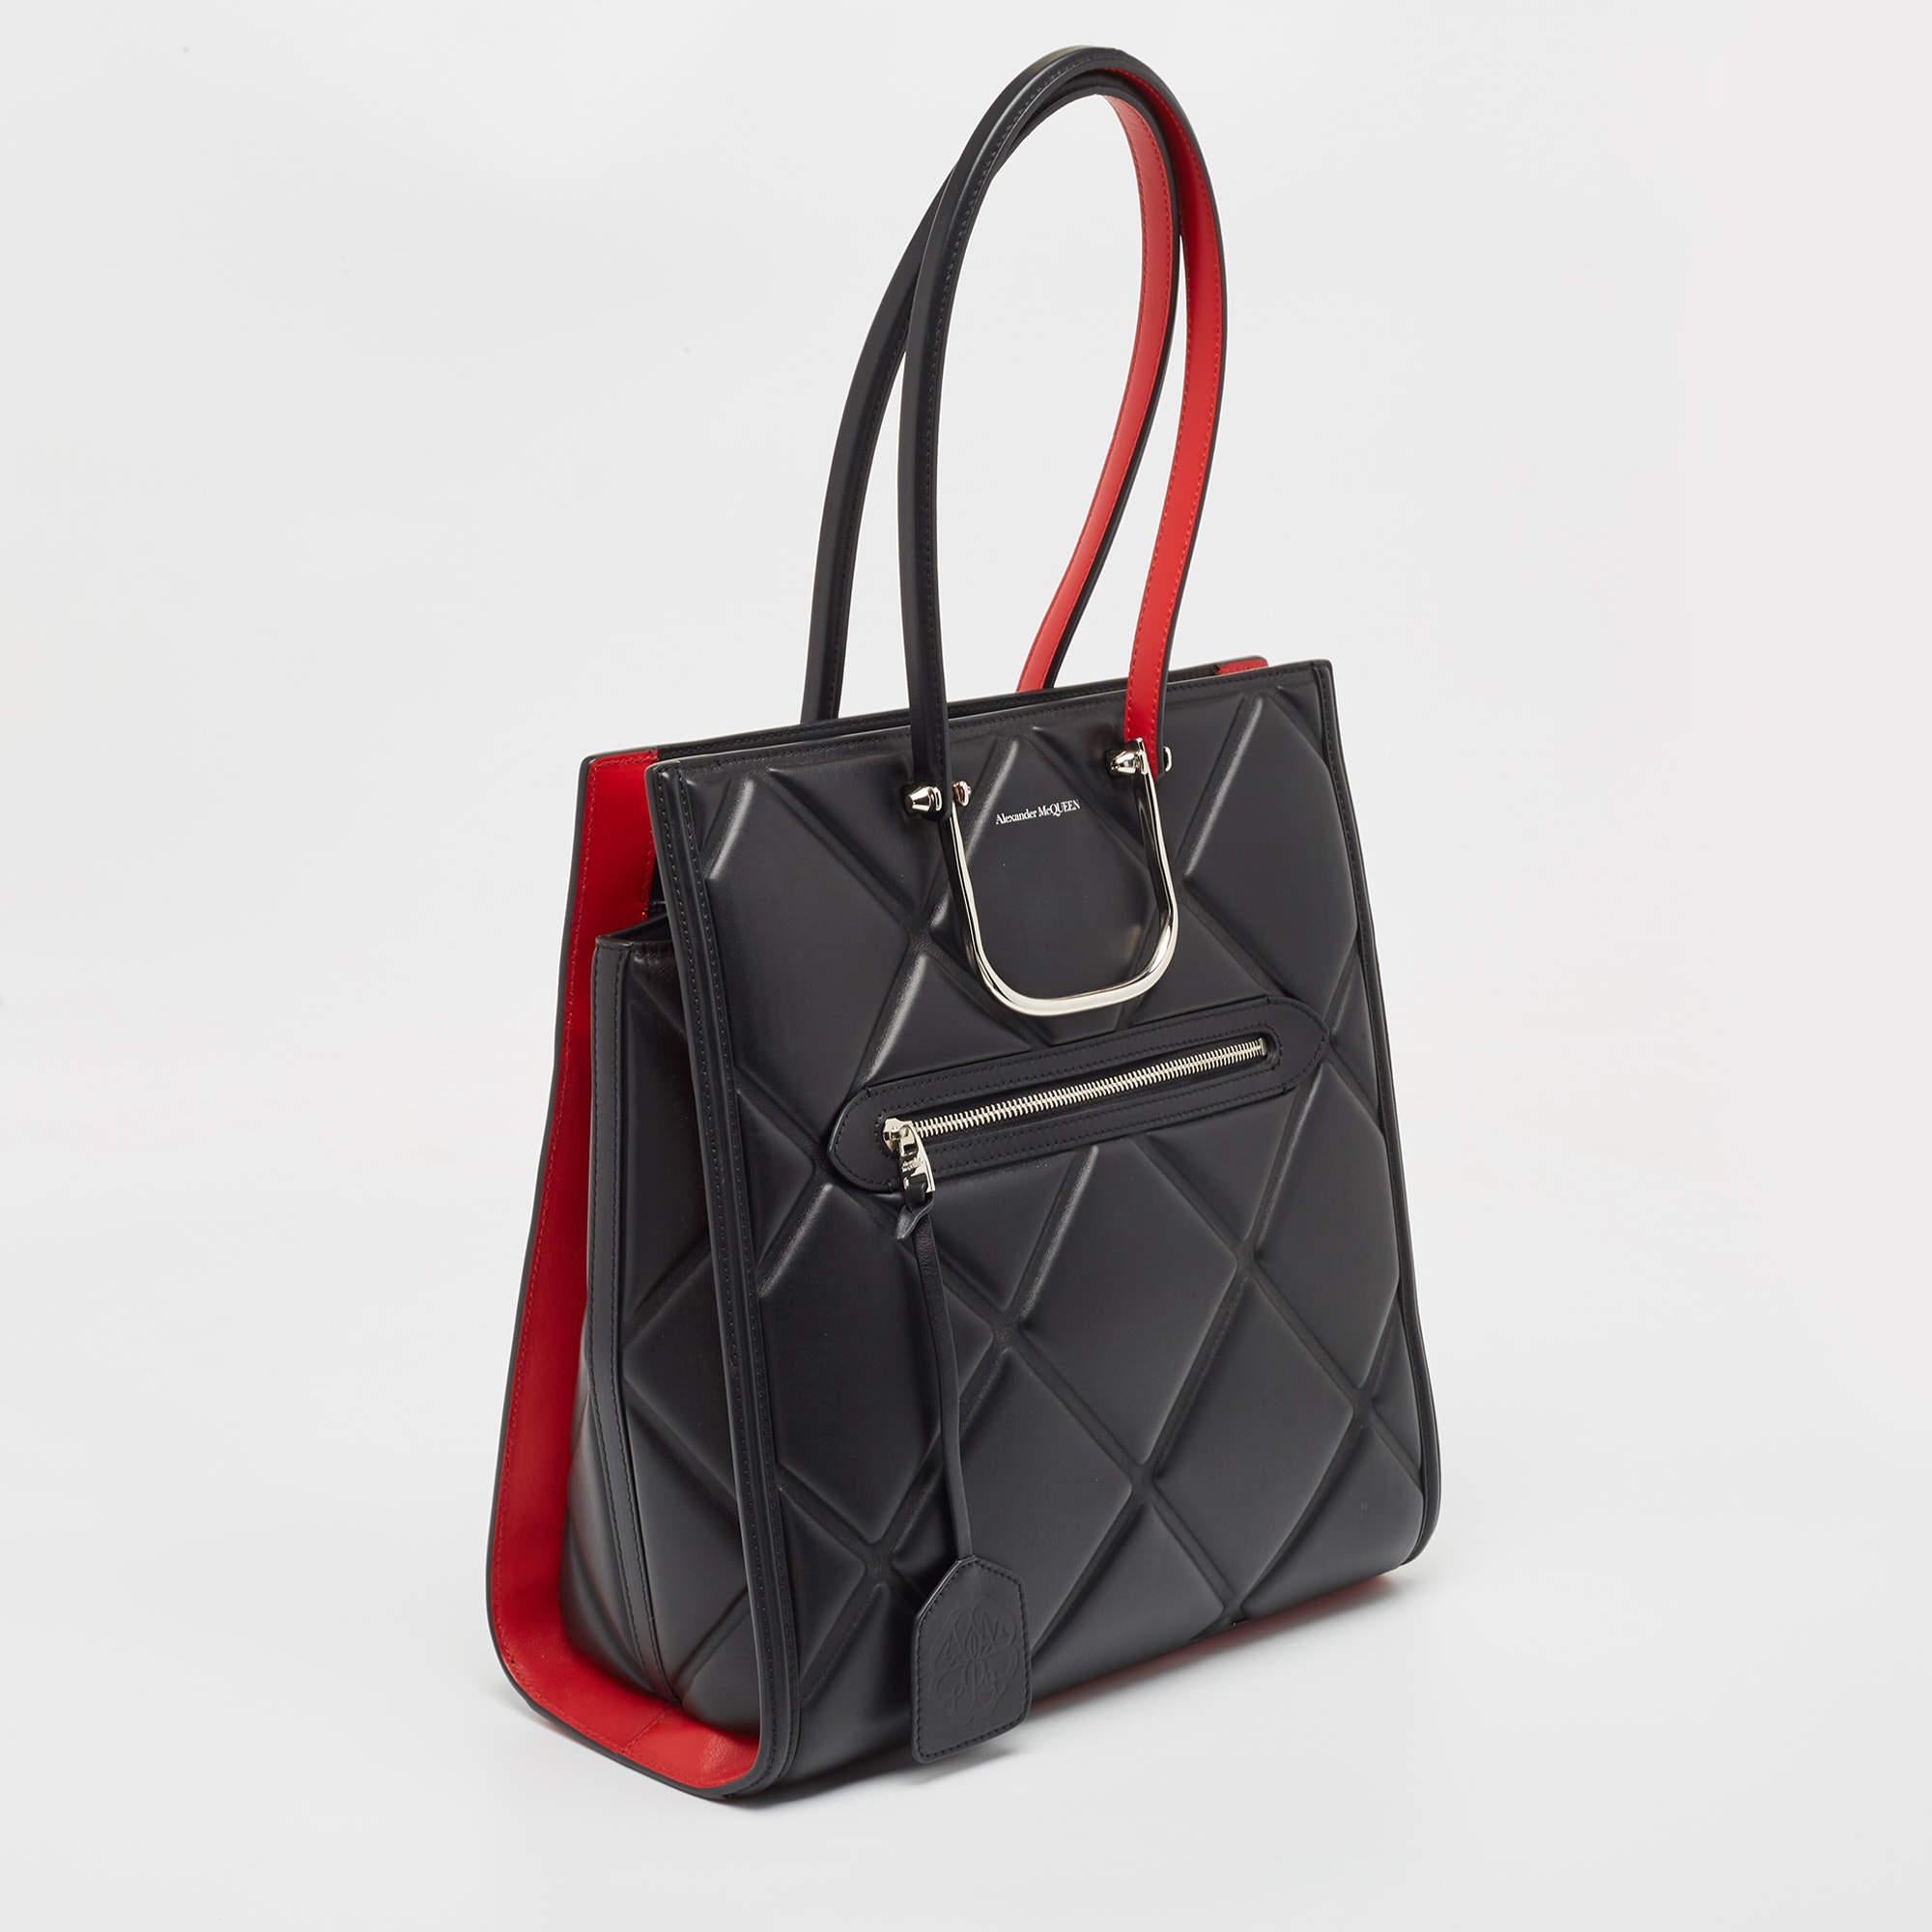 Alexander McQueen Black Quilted Leather The Tall Story Tote In Good Condition For Sale In Dubai, Al Qouz 2